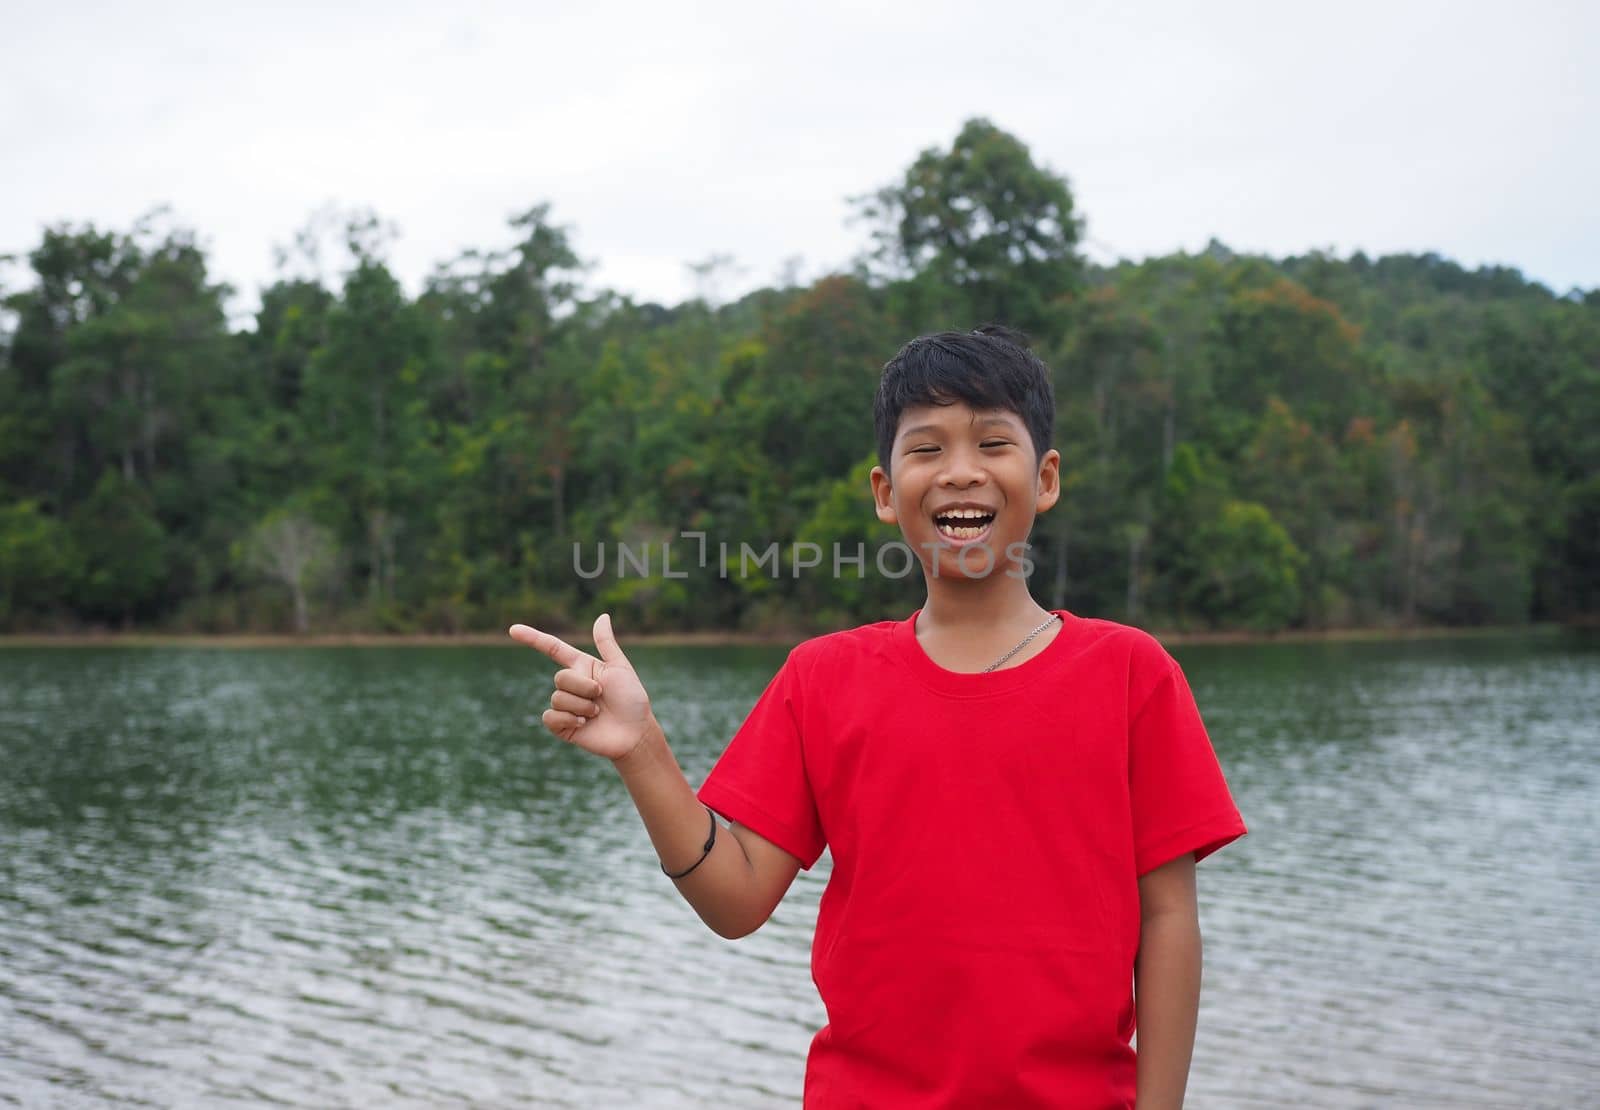 The boy smiled and pointed his hand to his side. On the background is a reservoir. by Unimages2527